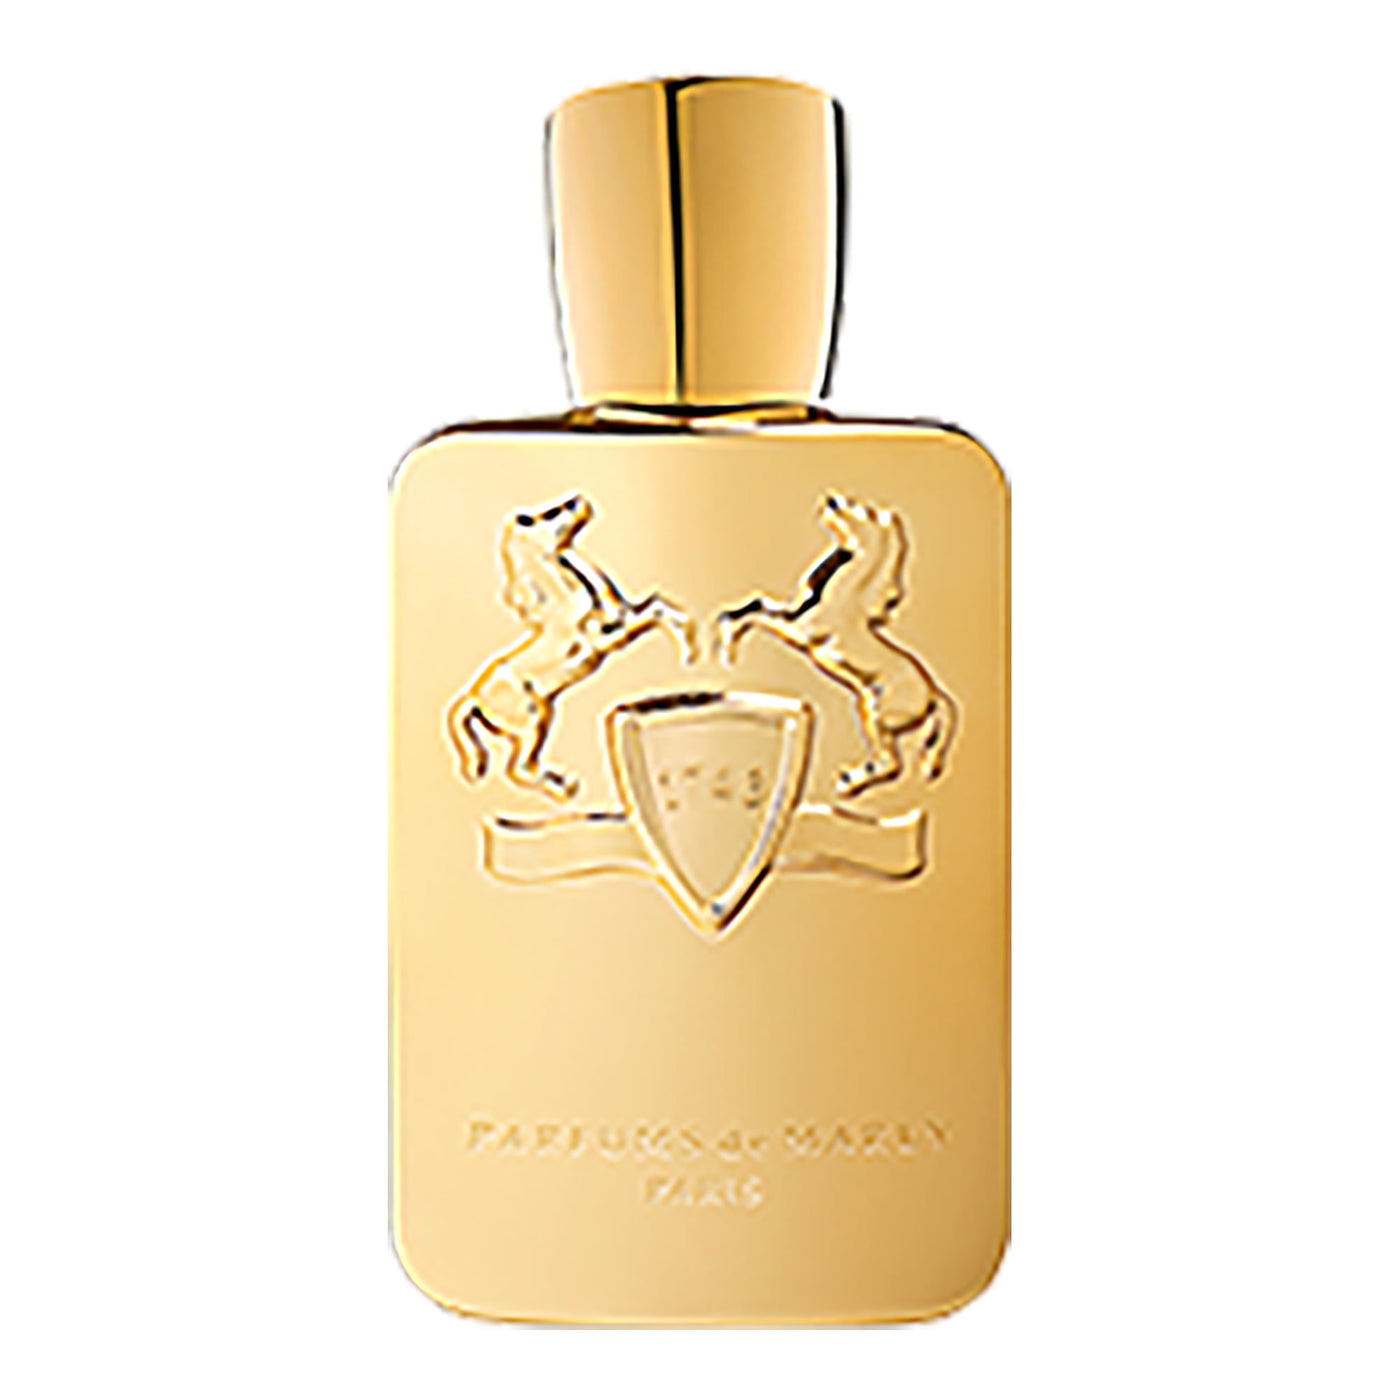 Parfums de Marly Godolphin - 125ml - Gharyal by Collectibles 